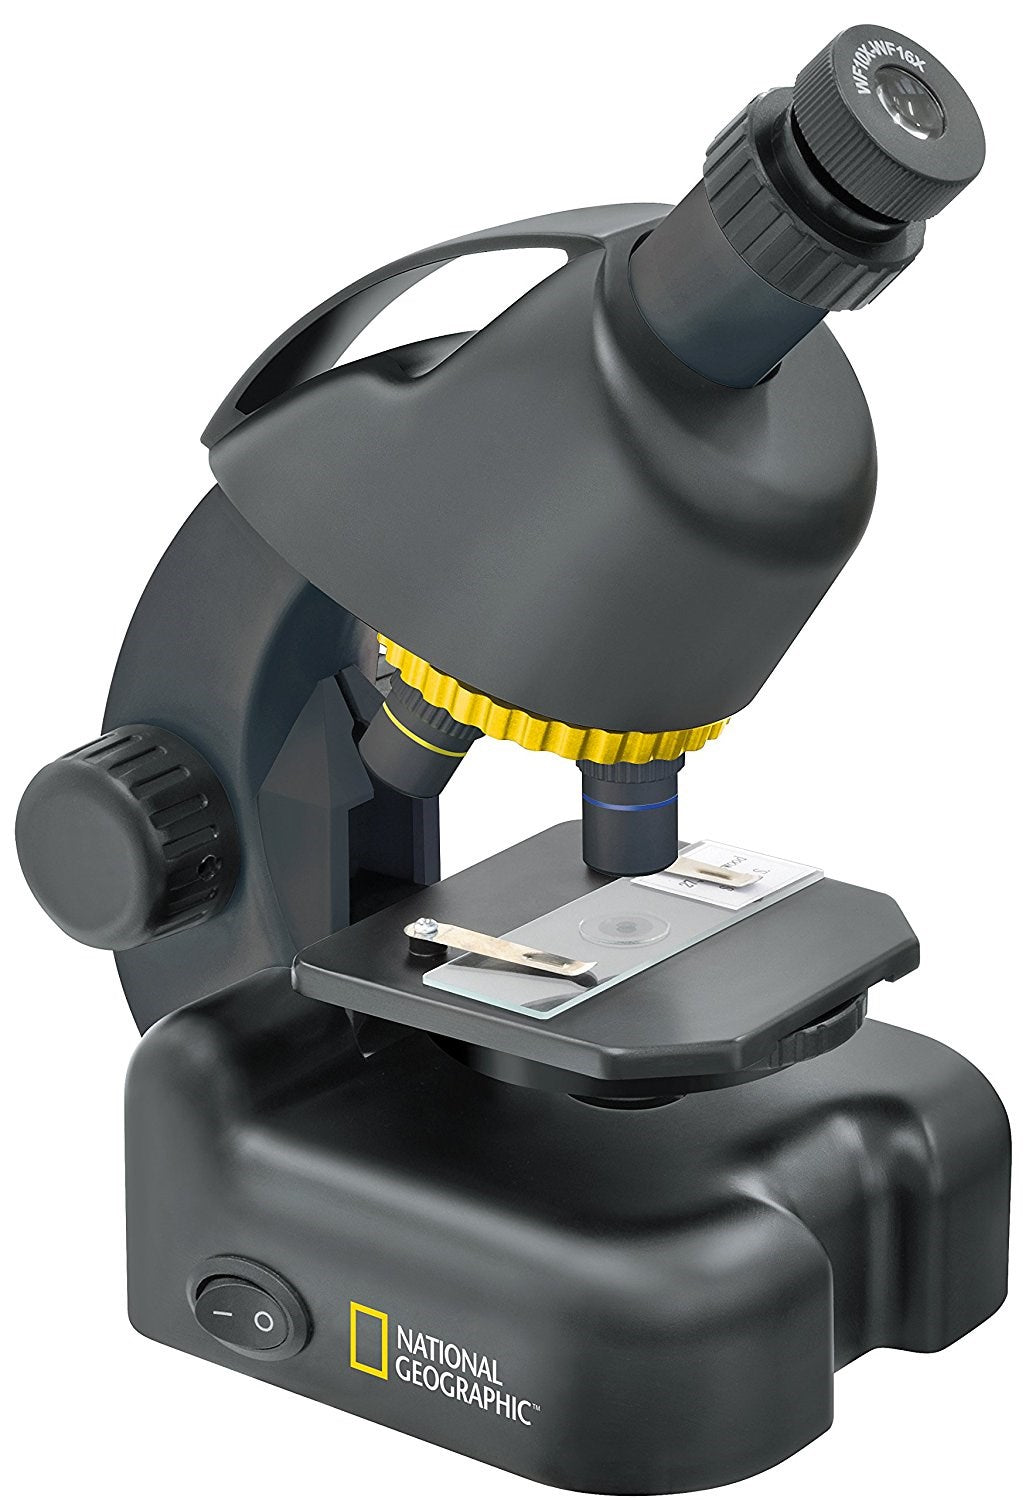 Product Image of National Geographic Microscope 40x-640x with Smartphone Holder